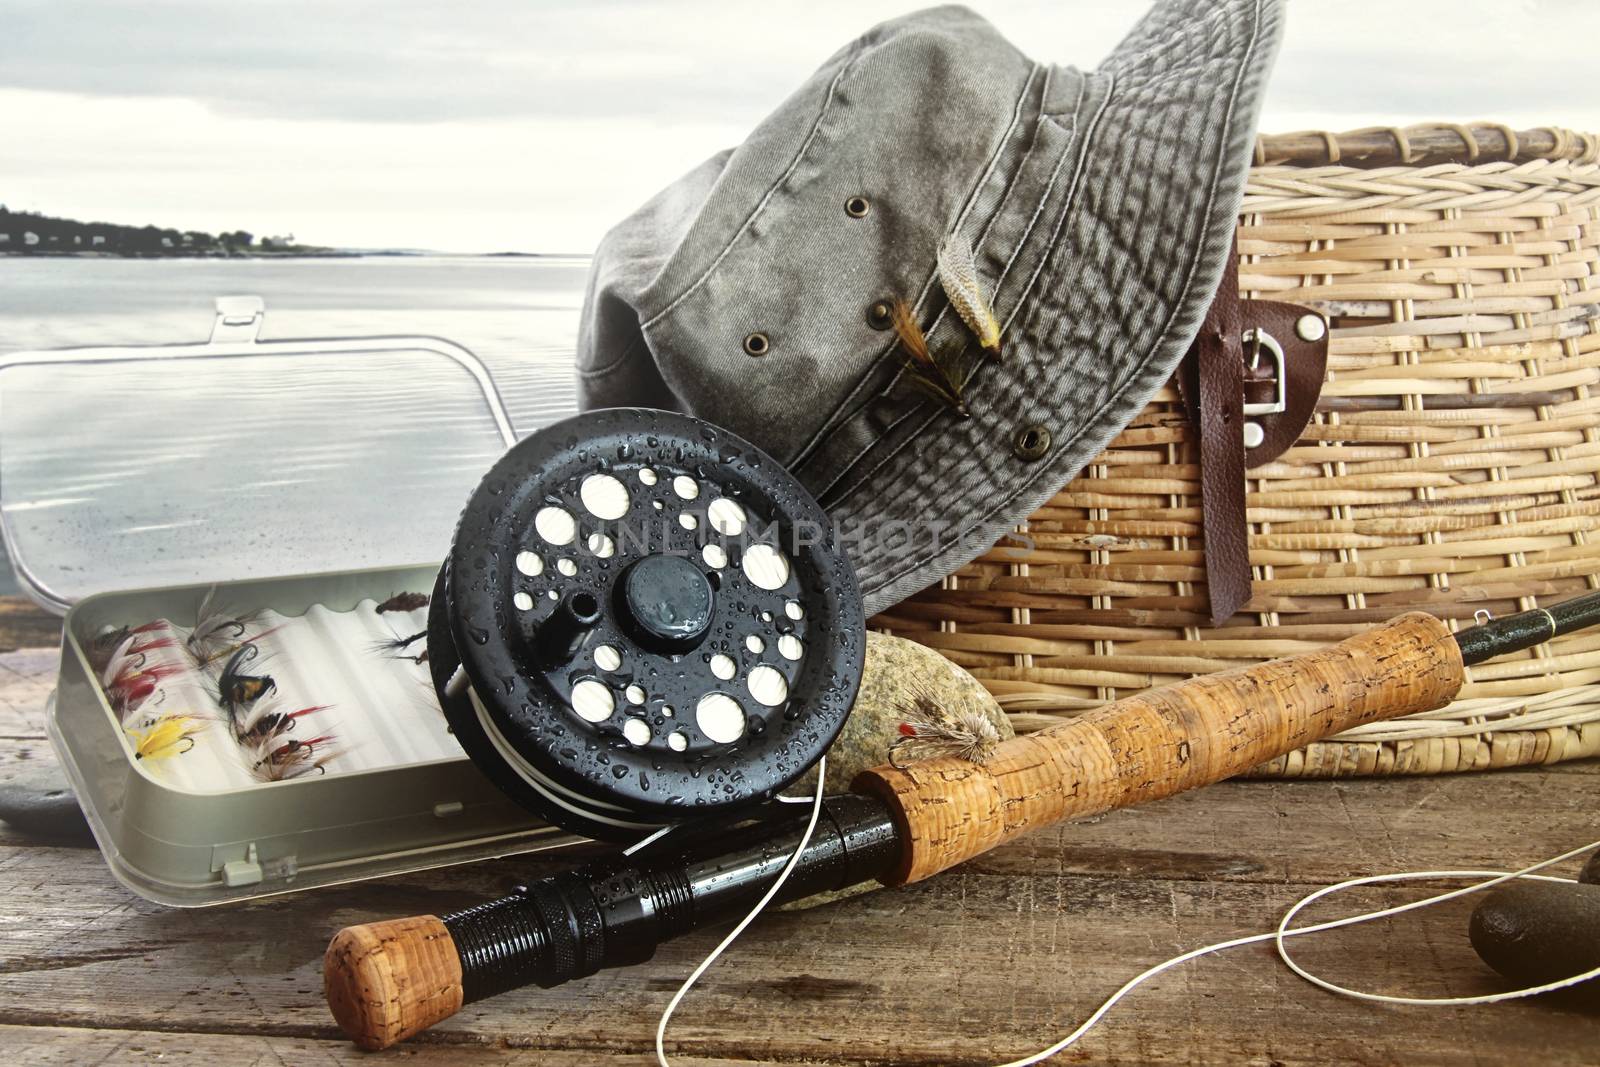 Hat and fly fishing gear on table near the water's edge